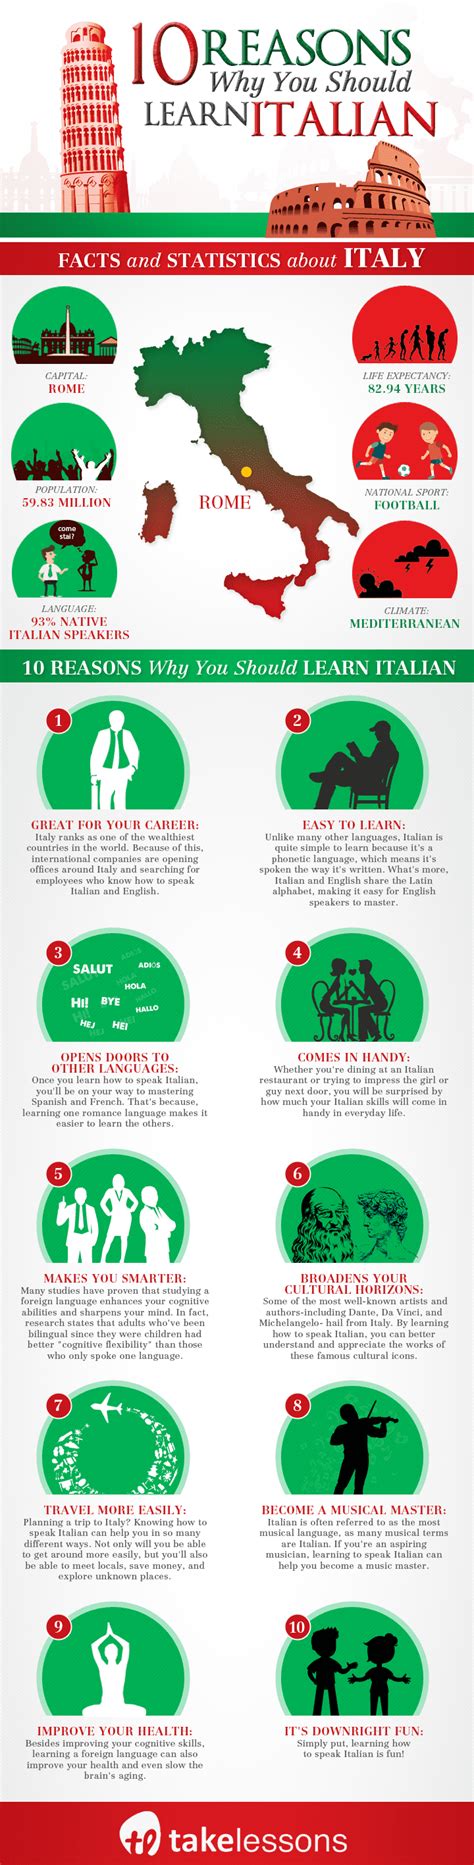 10 reasons why you should learn to speak italian [infographic]